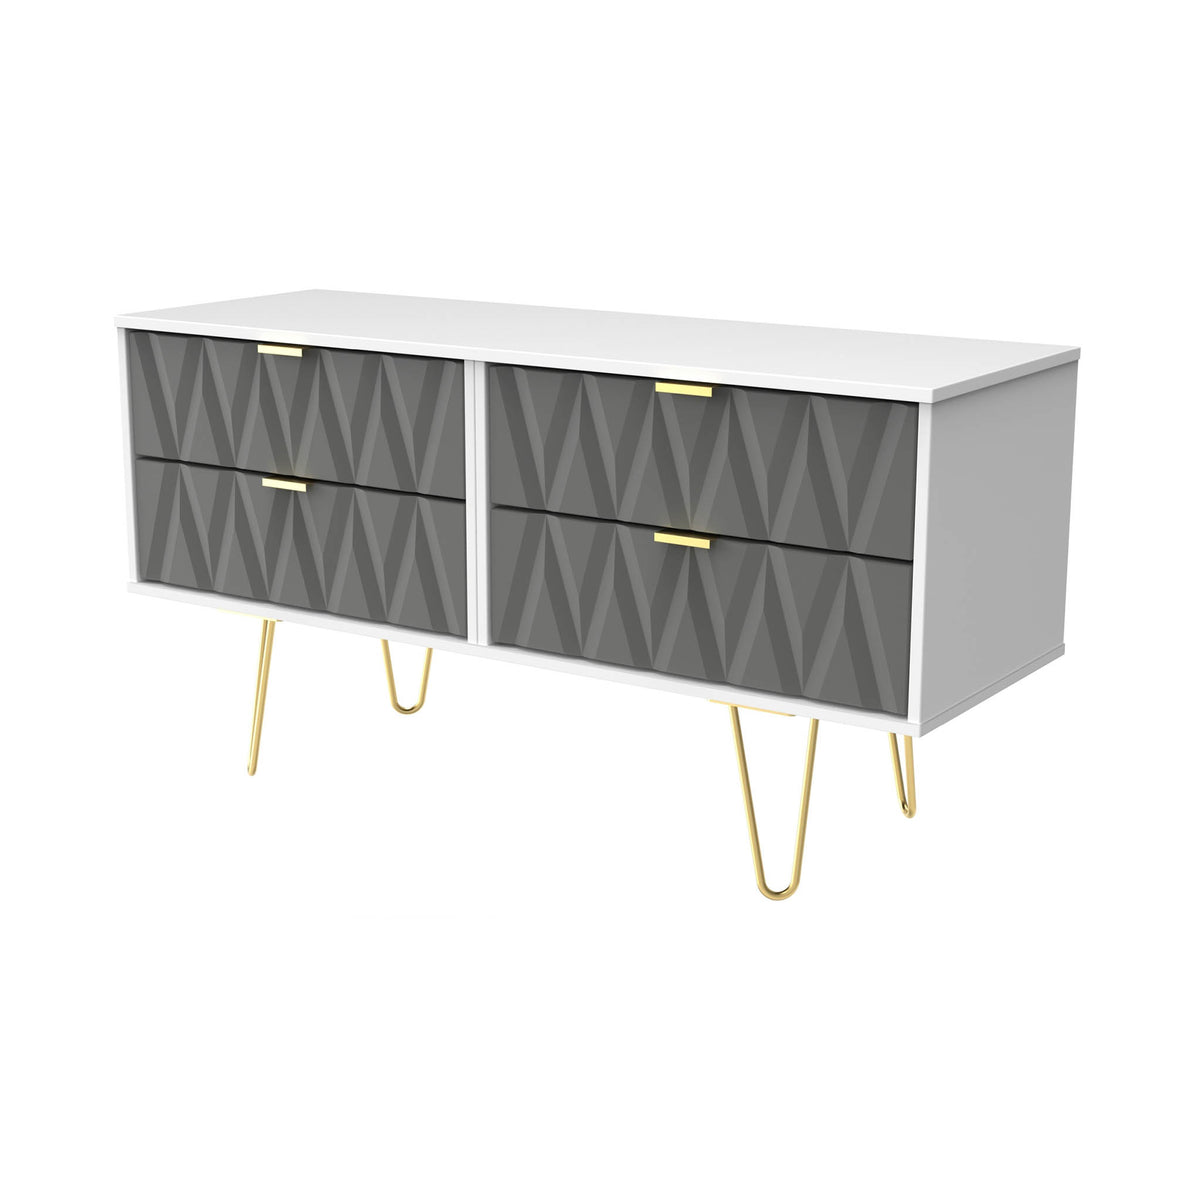 Geo white and grey 4 Drawer Contemporary Low TV Unit with gold hairpin legs